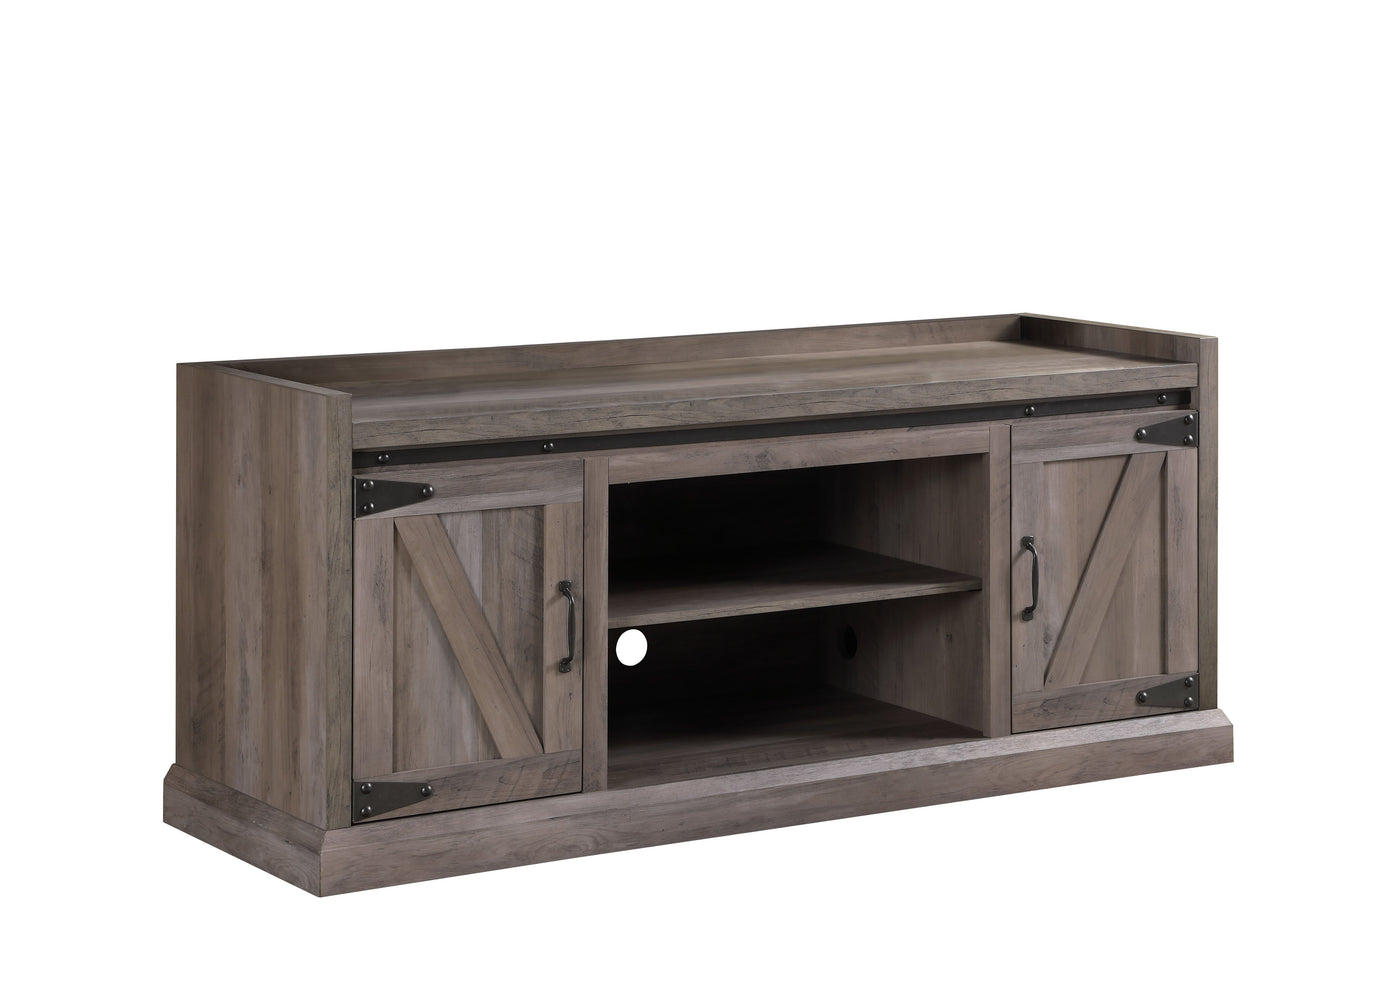 Roane TV Stand - Light Washed Plank